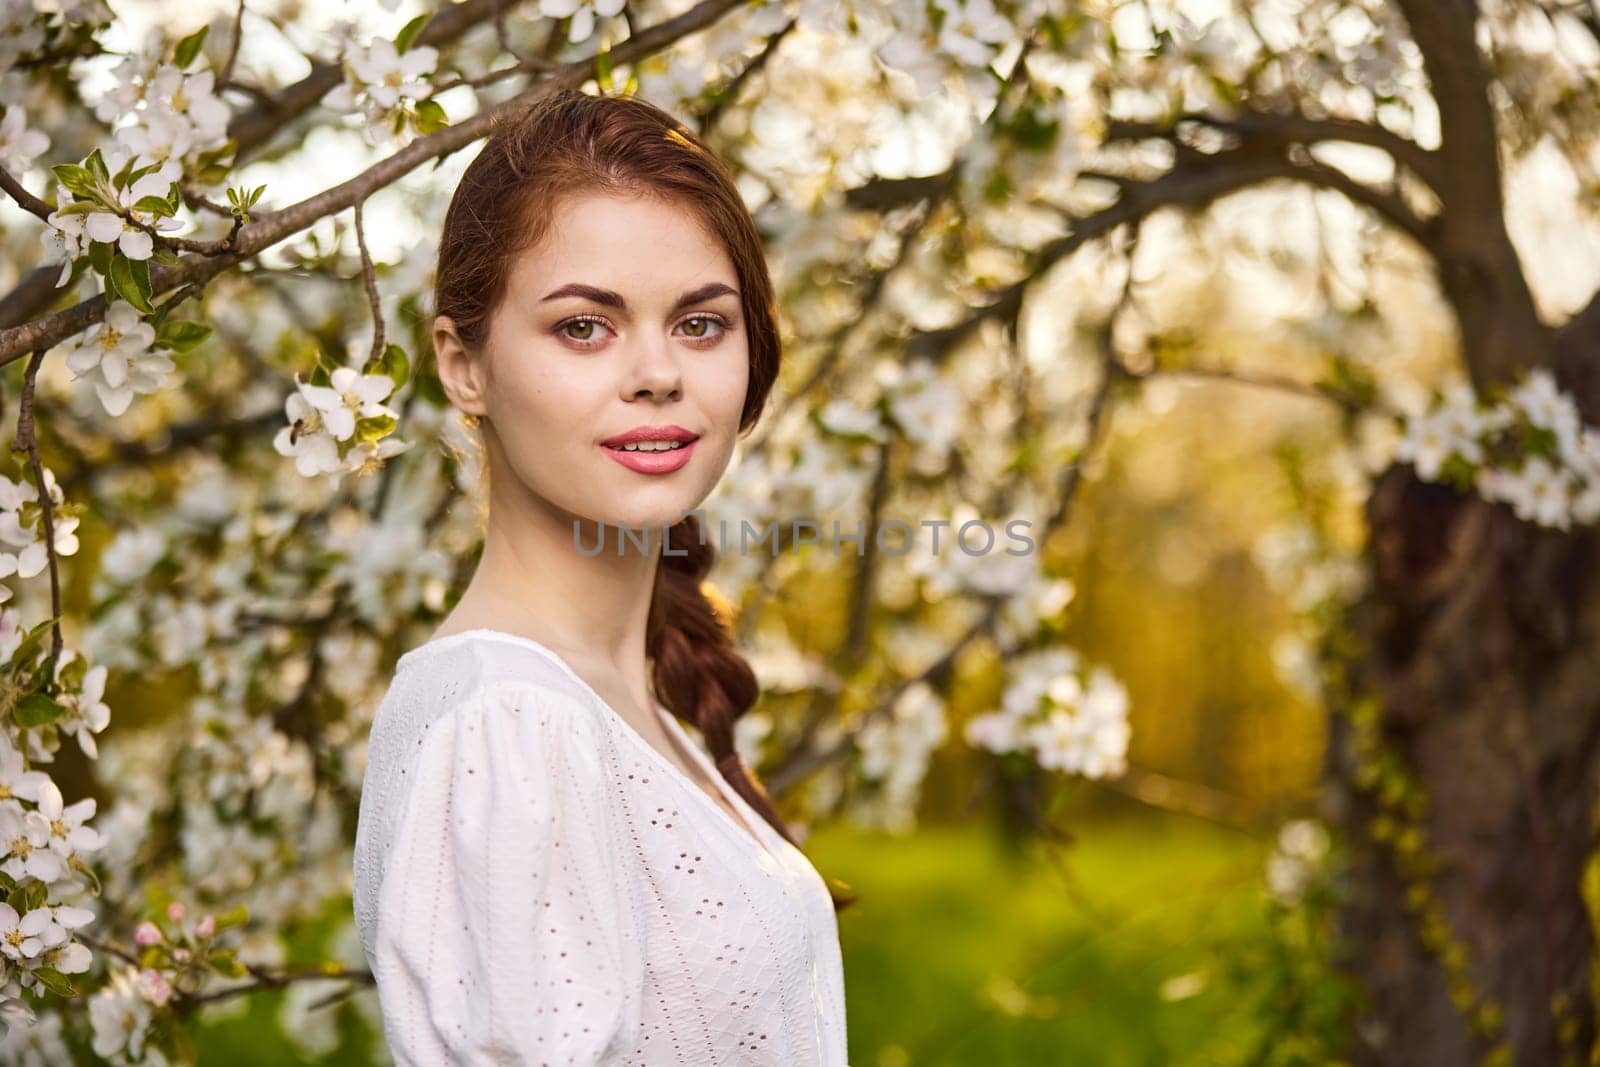 a sweet, young woman stands in a blooming garden in a light dress by Vichizh